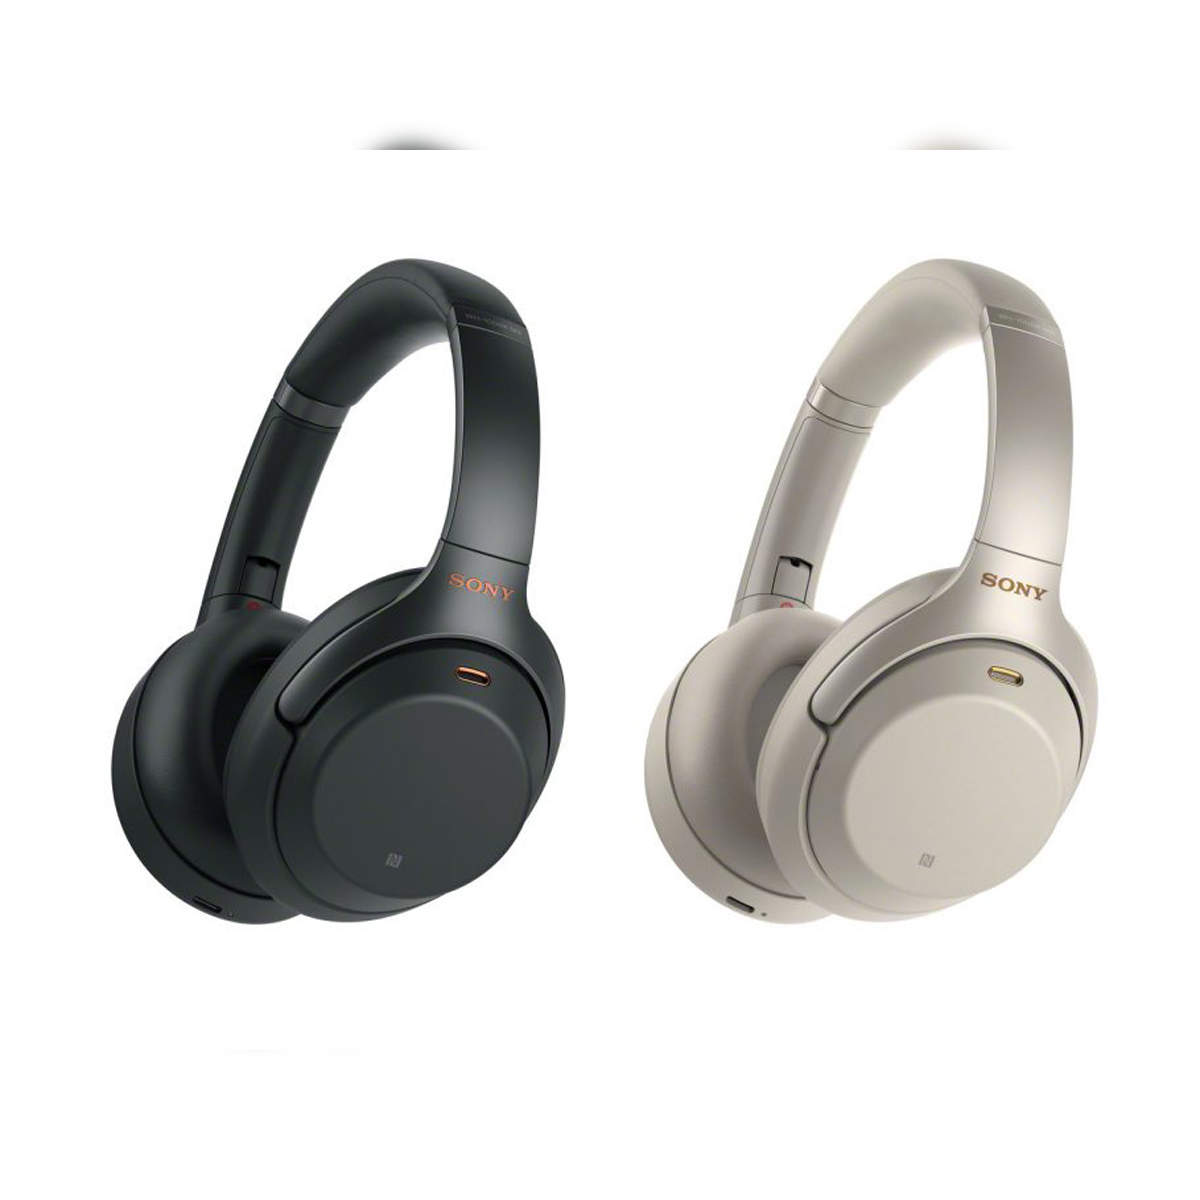 headphone: Sony WH-1000XM3 is their premium offering with